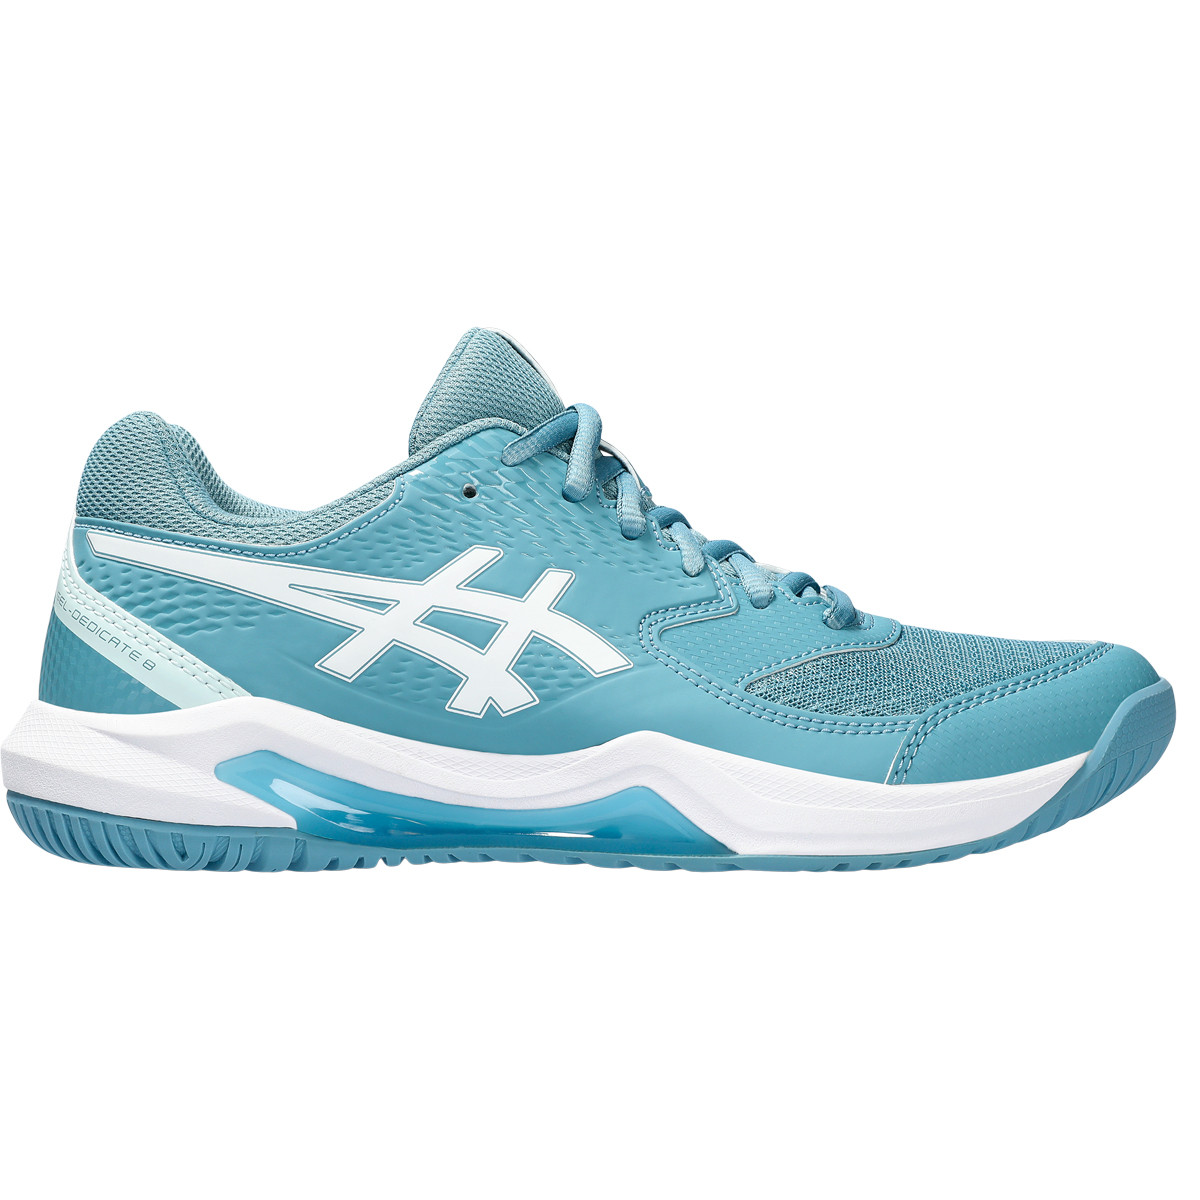 CHAUSSURES ASICS FEMME GEL DEDICATE 8 TOUTES SURFACES - Chaussures